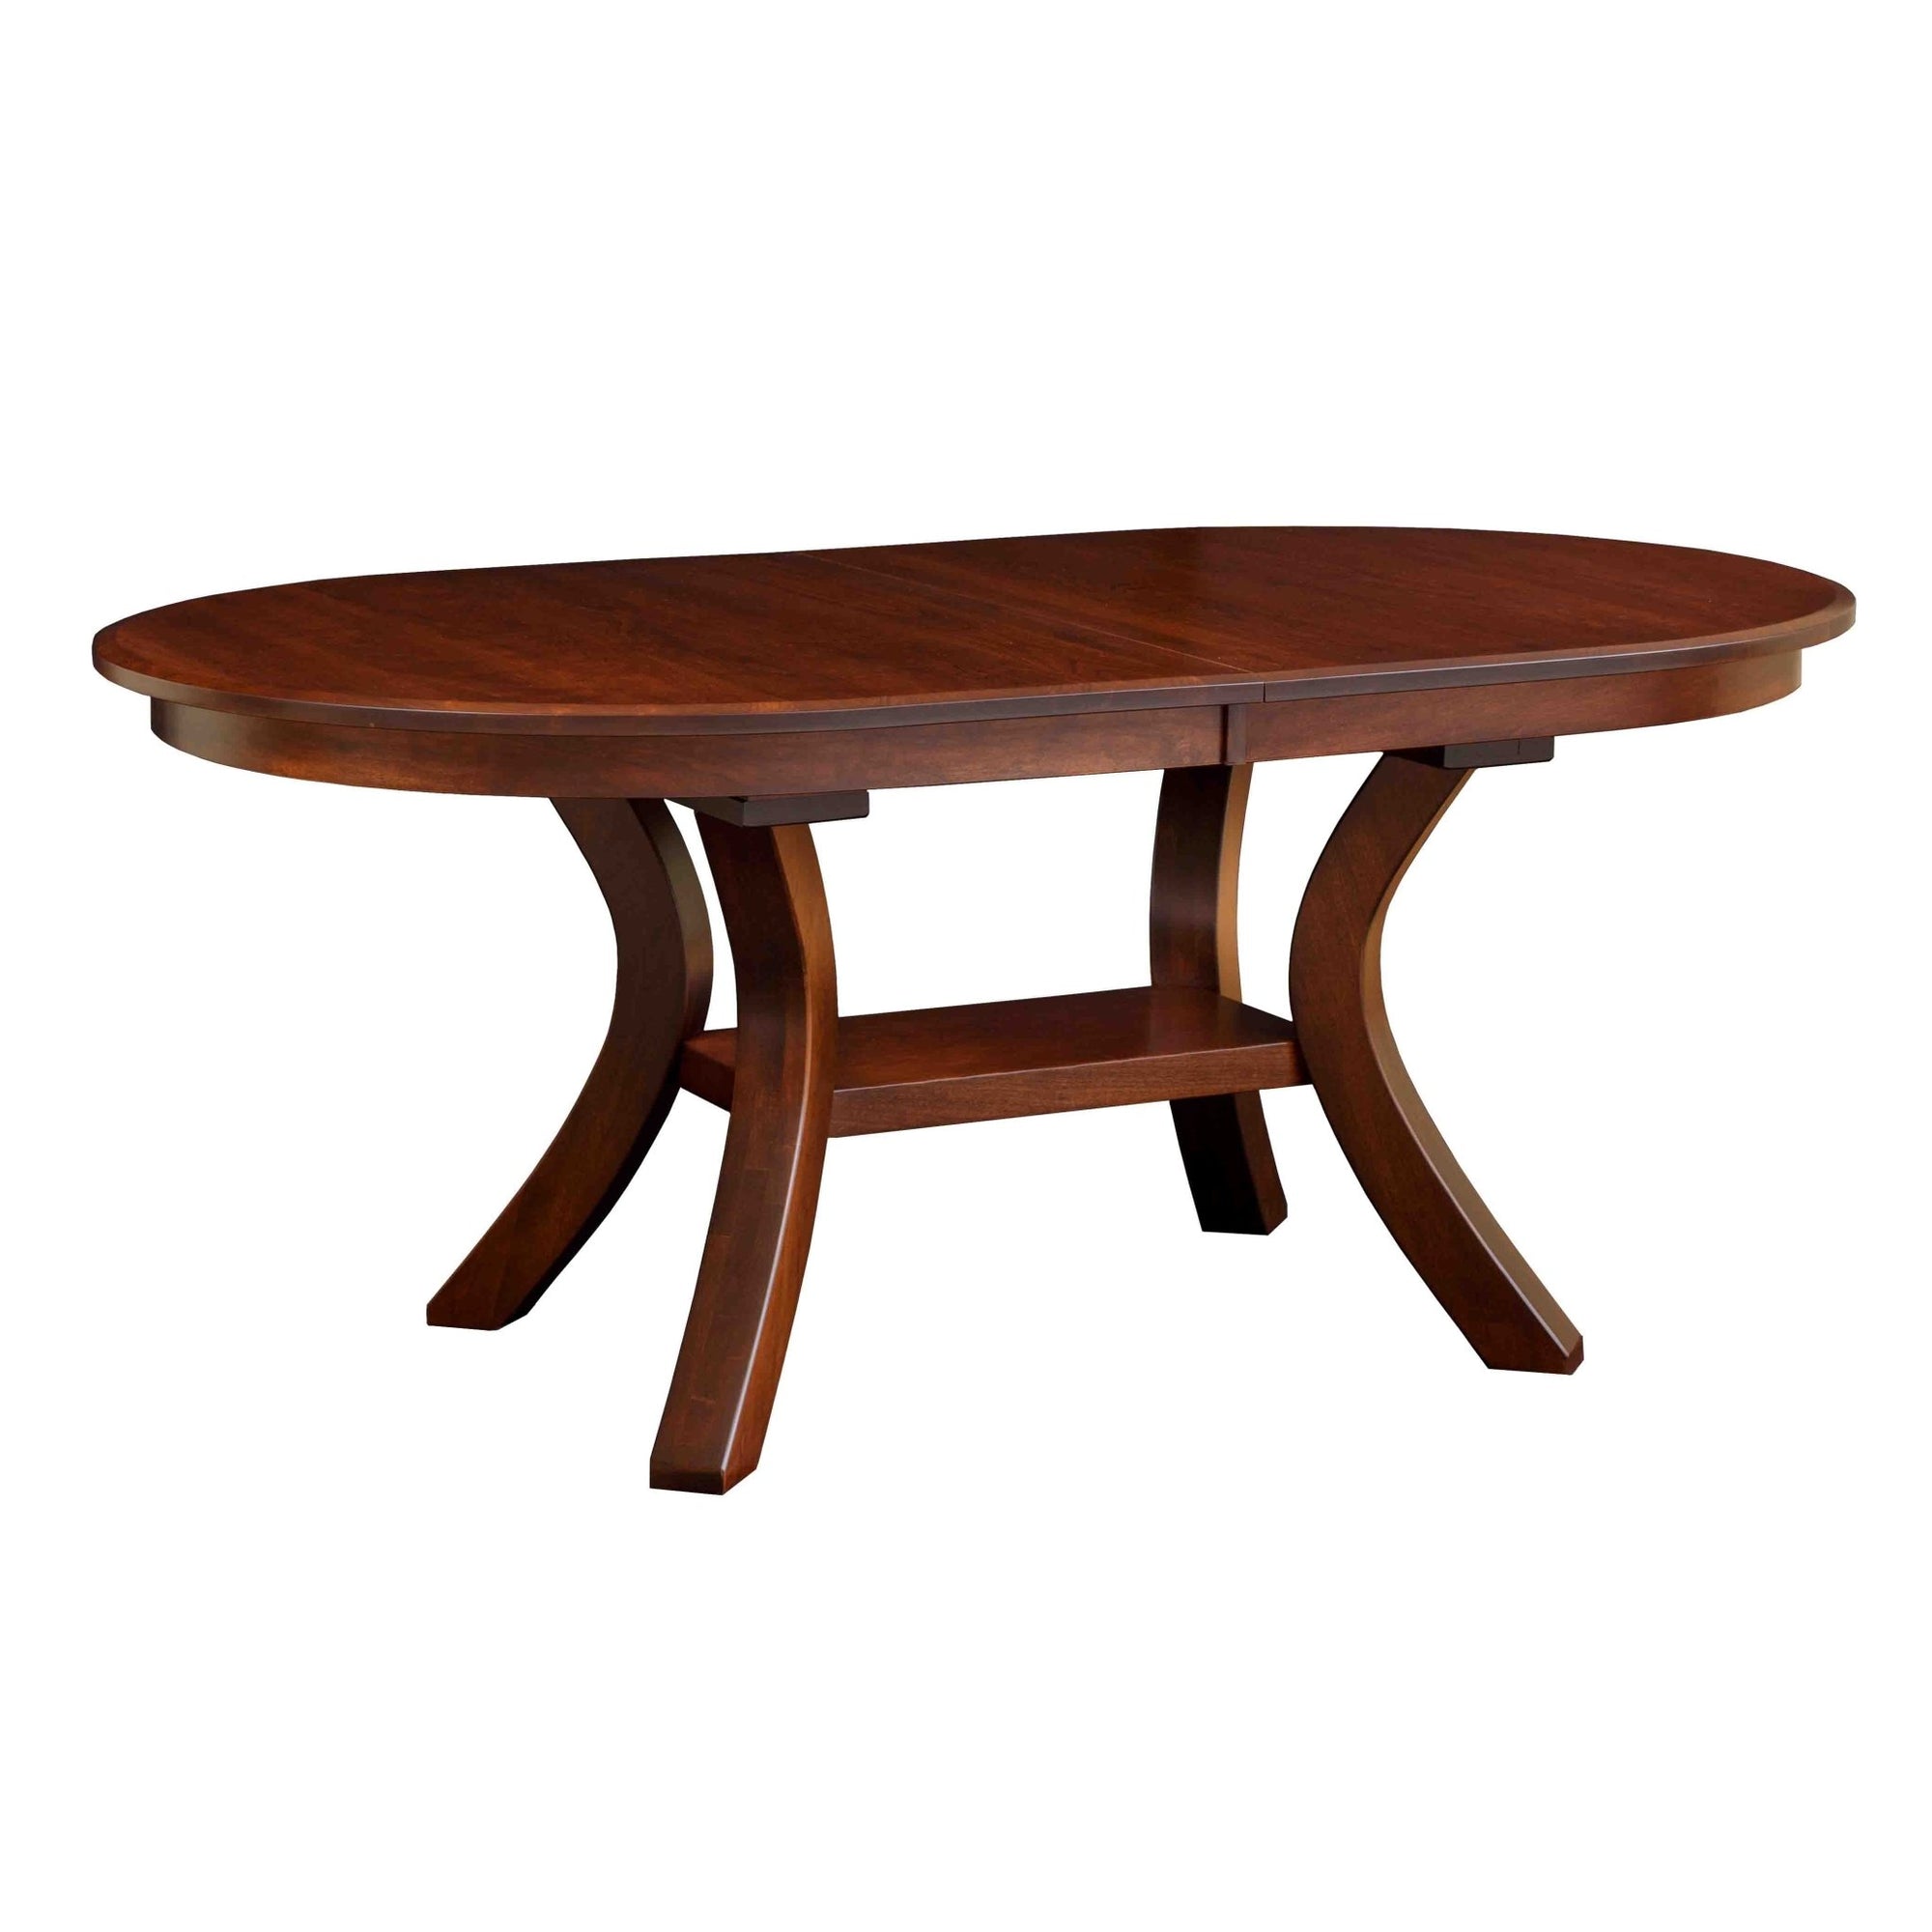 Christy Table - snyders.furniture